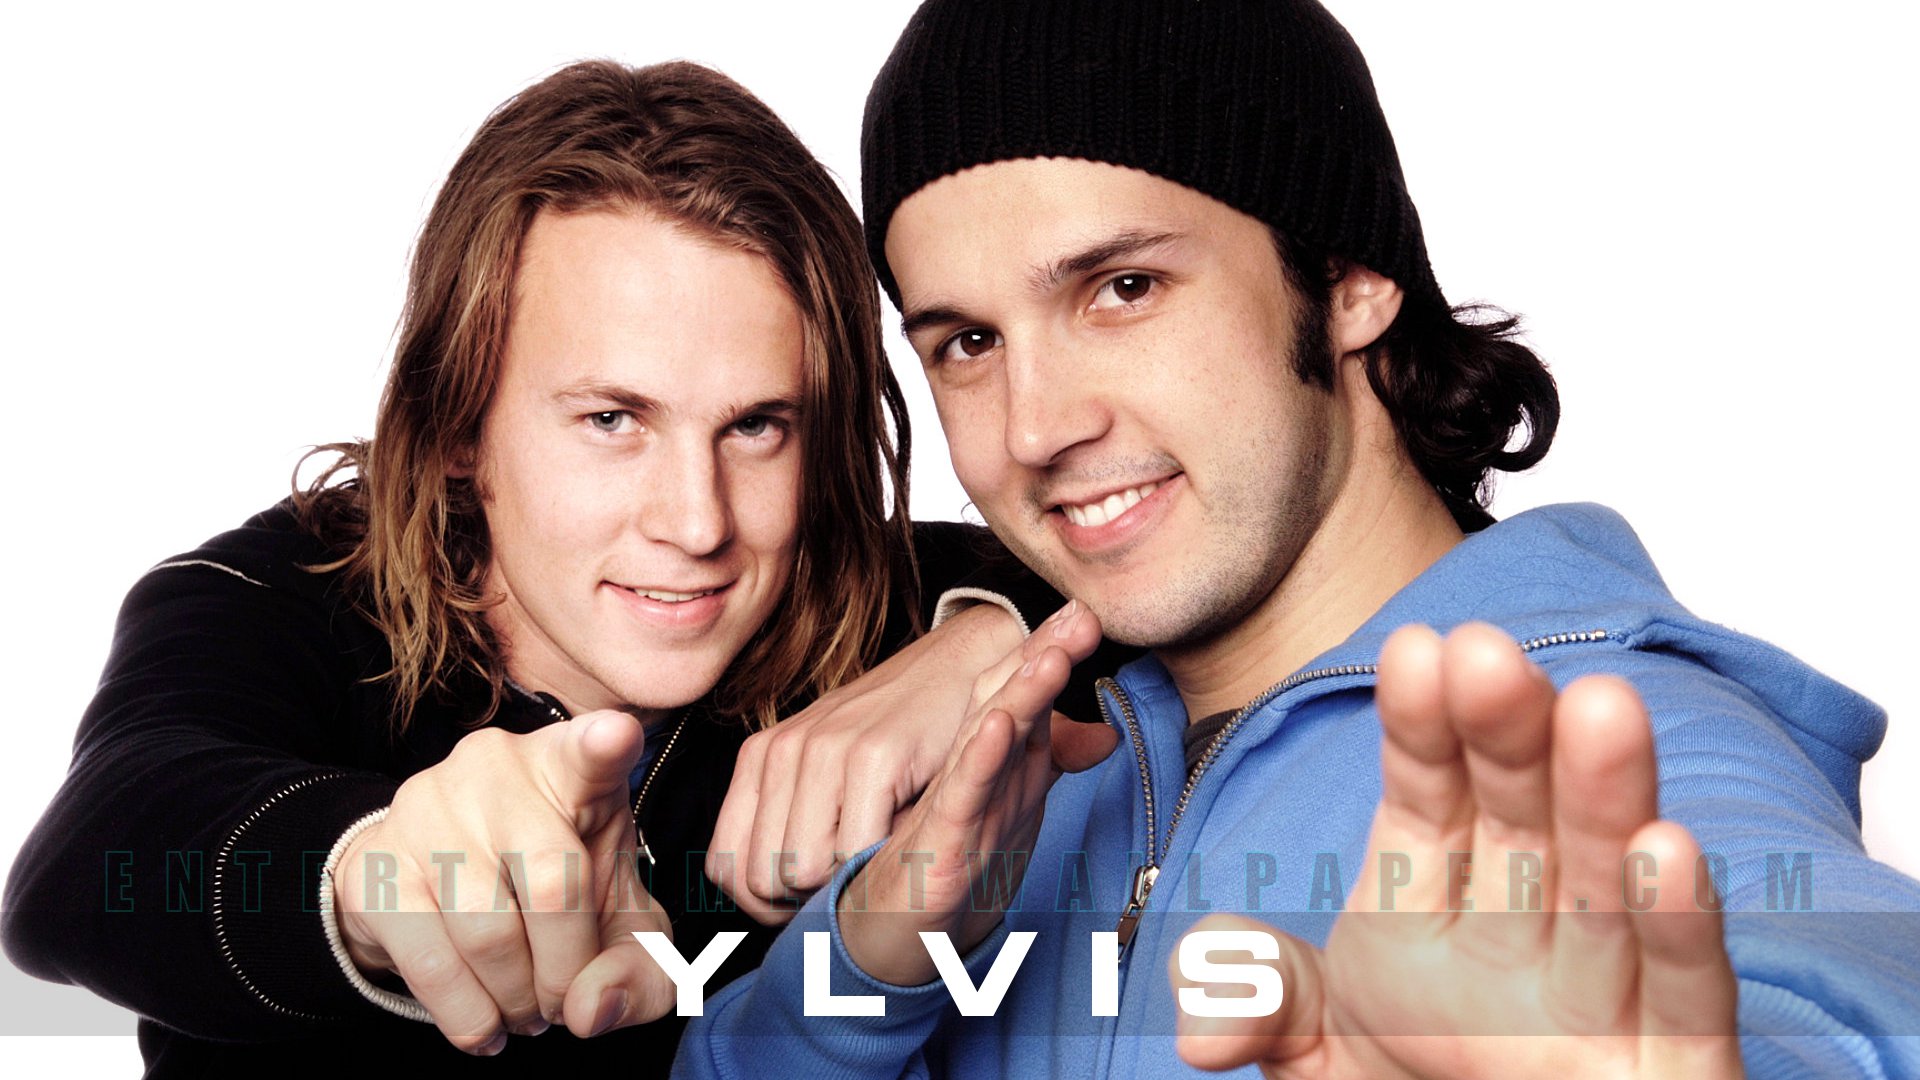 The band Ylvis must know the sound a fox makes. - CultureMap Dallas